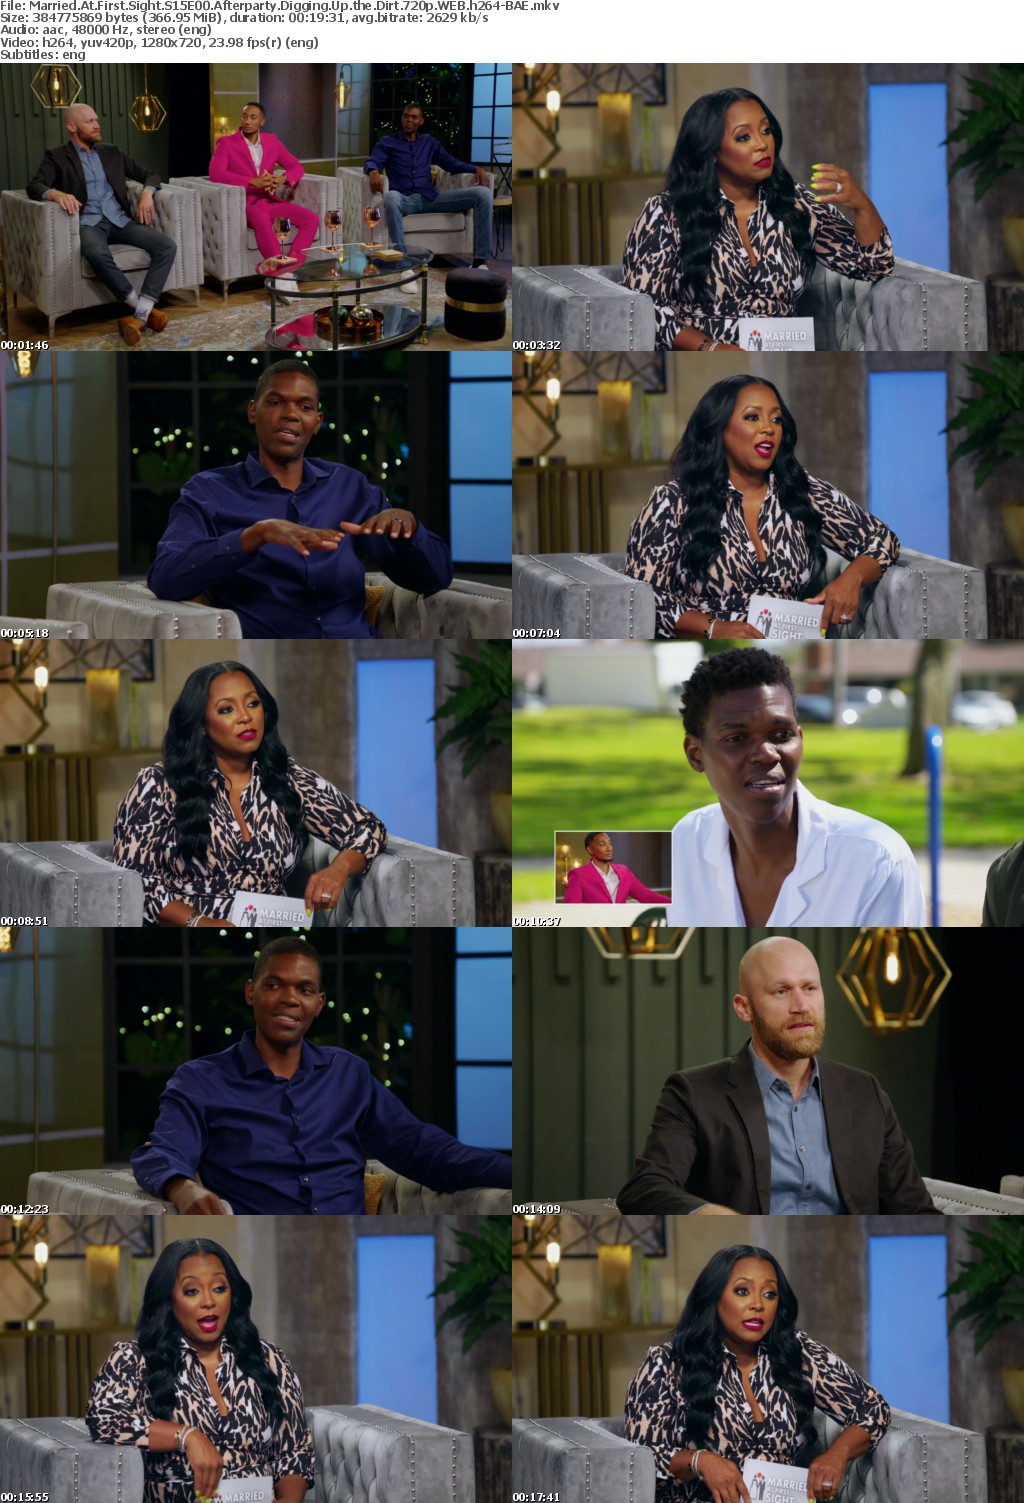 Married At First Sight S15E00 Afterparty Digging Up the Dirt 720p WEB h264-BAE